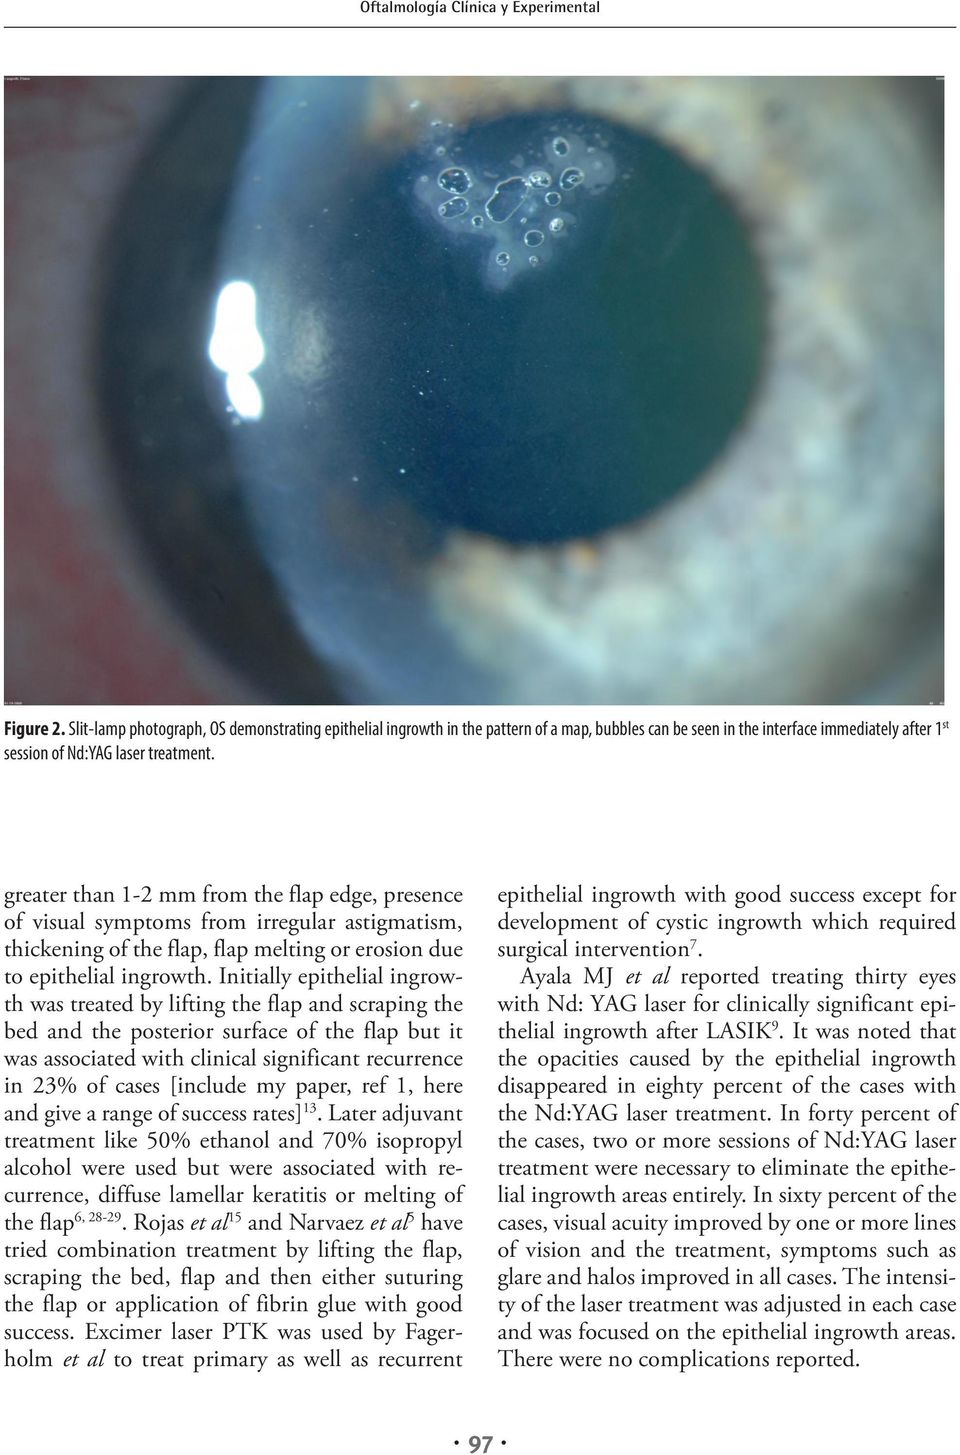 Initially epithelial ingrowth was treated by lifting the flap and scraping the bed and the posterior surface of the flap but it was associated with clinical significant recurrence in 23% of cases